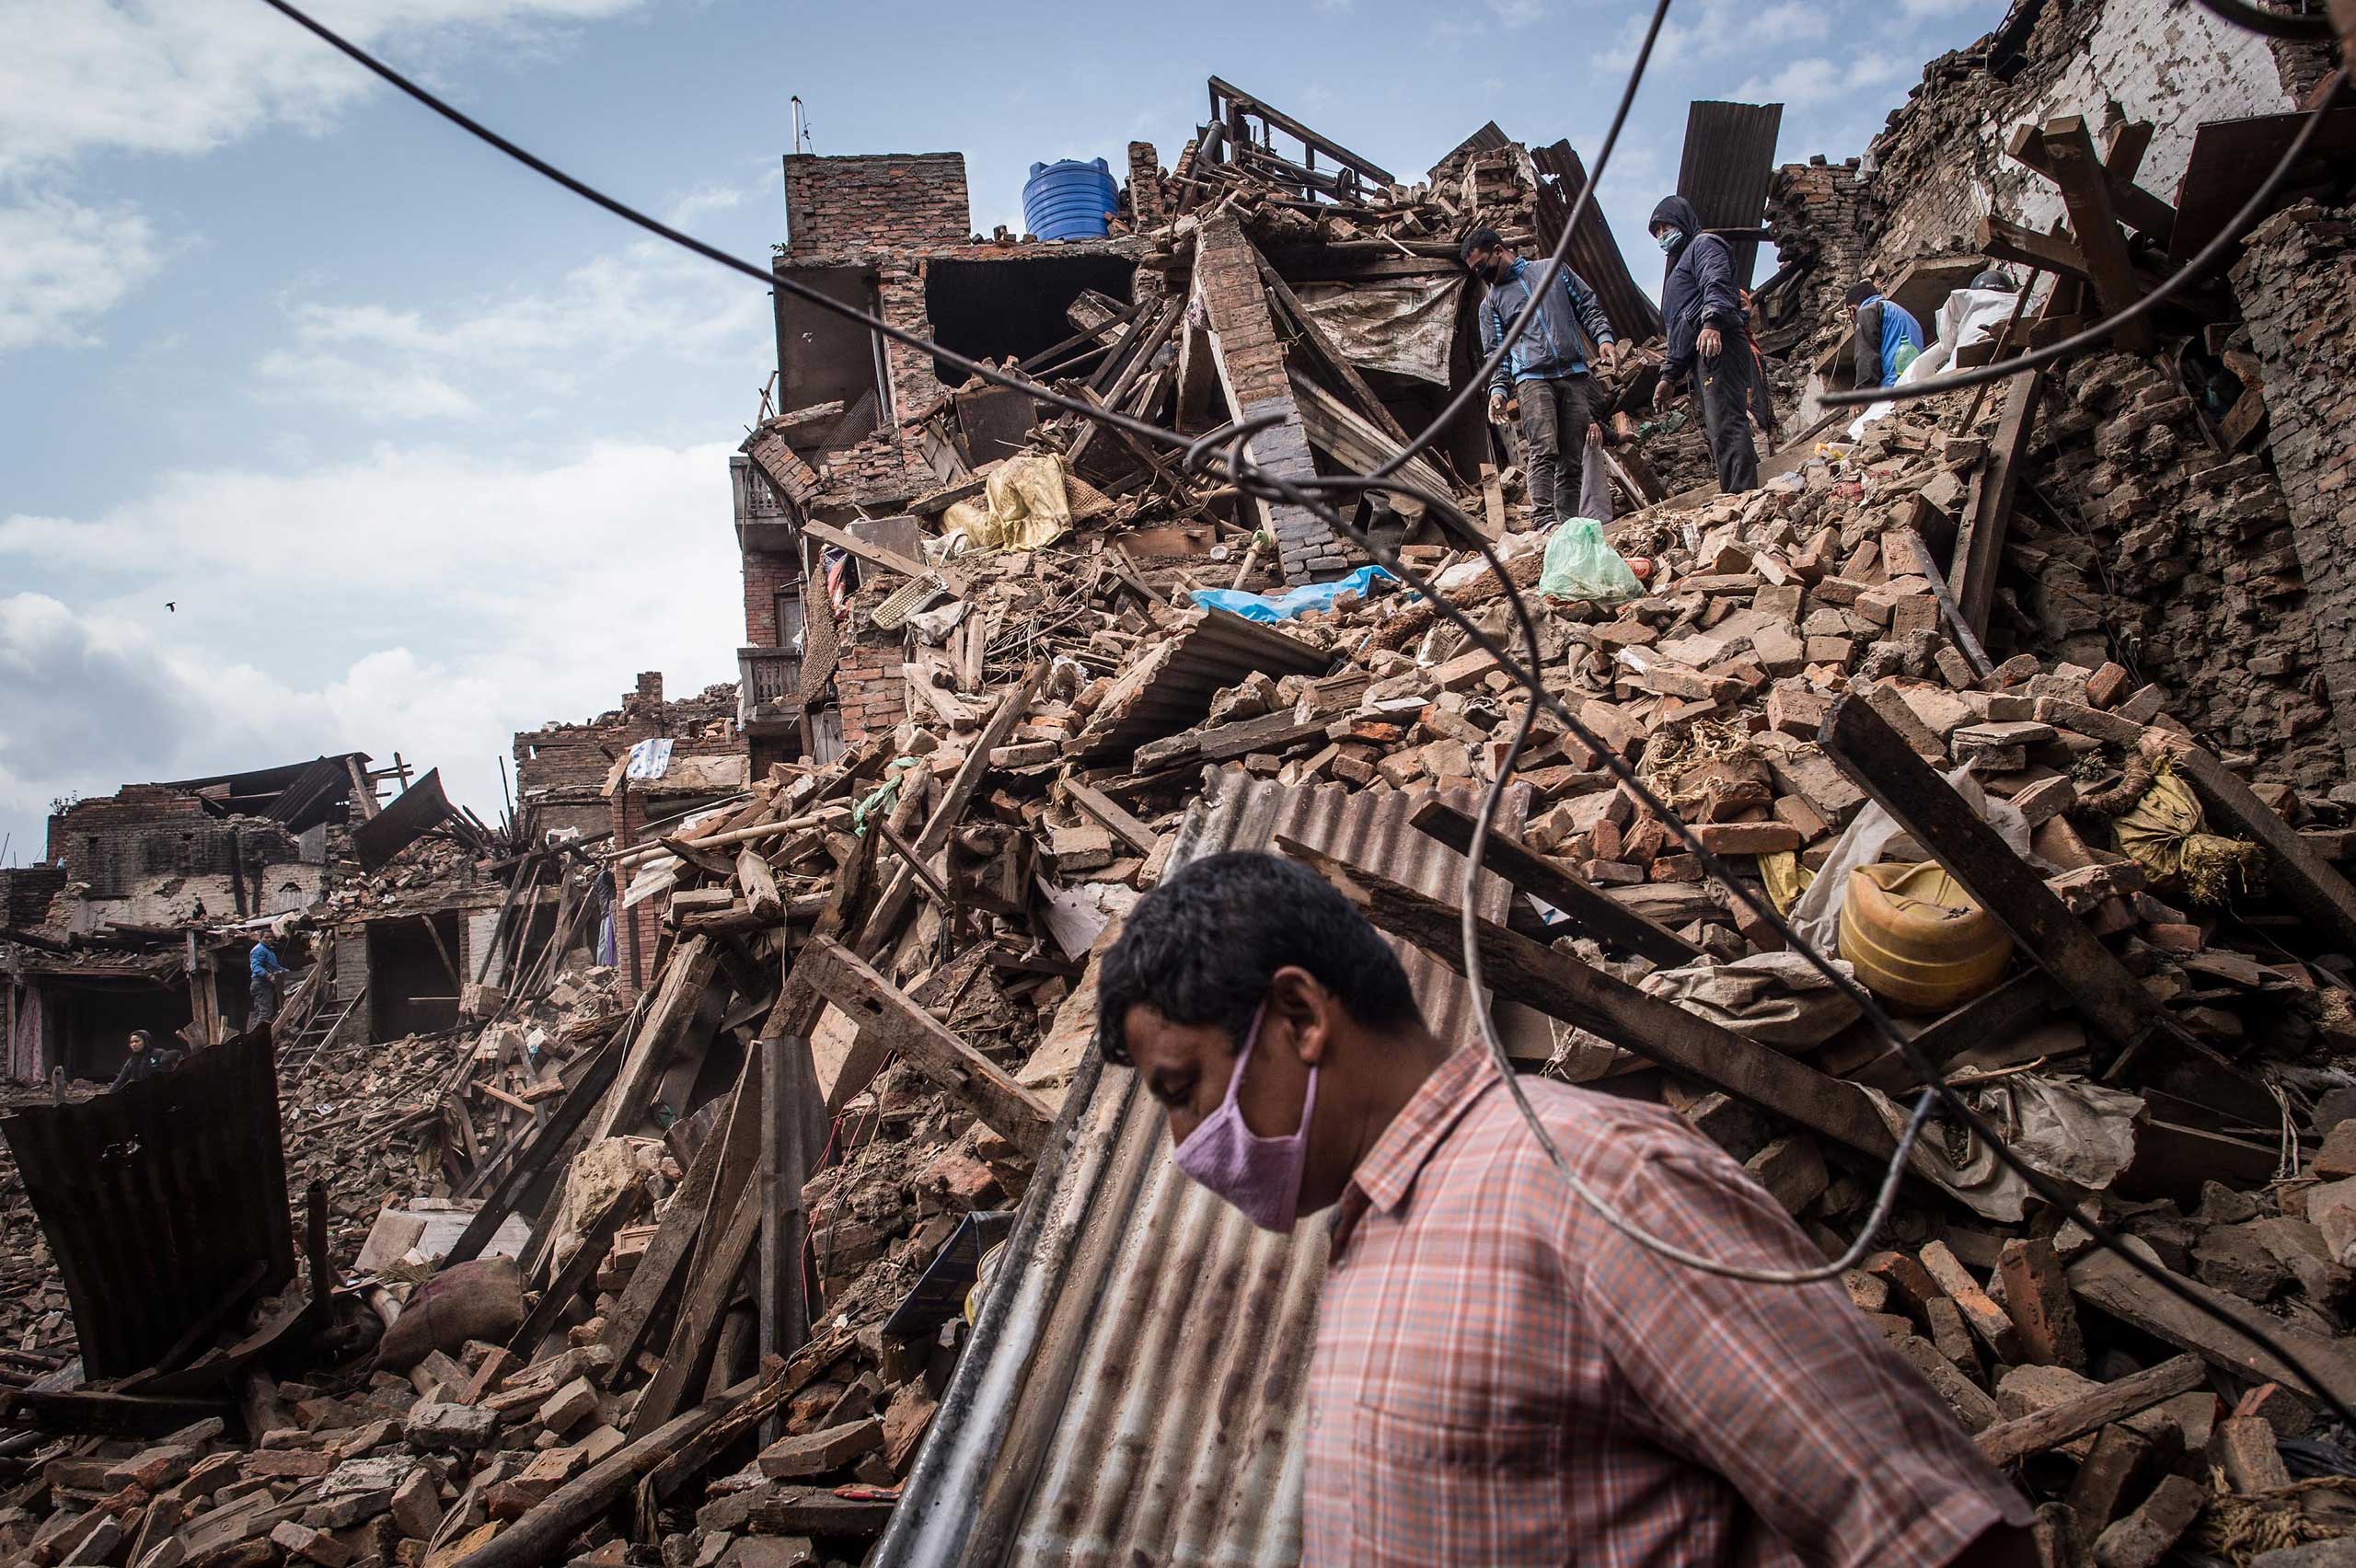 Nepalese victims of the earthquake search for their belongings among debris of their homes in Bhaktapur, Nepal, on April 29, 2015. (David Ramos—Getty Images)